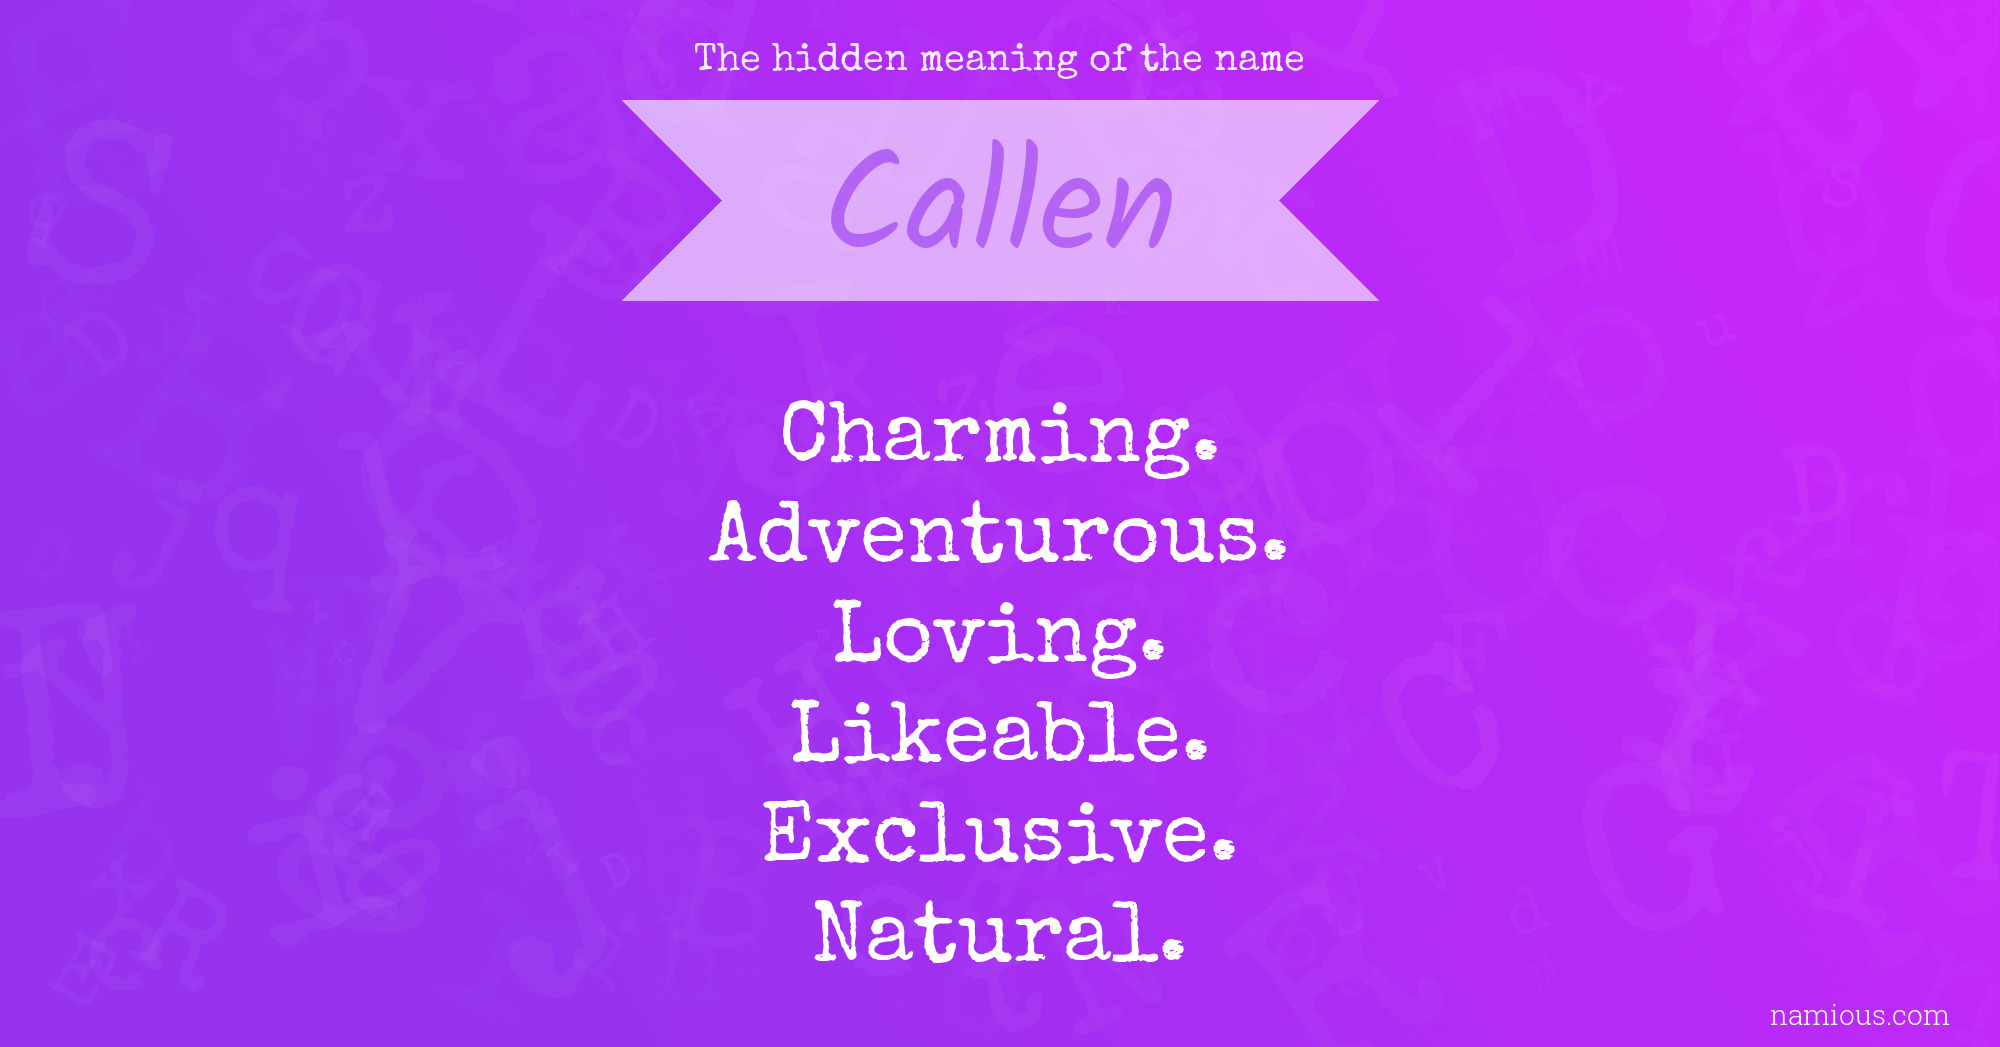 The hidden meaning of the name Callen